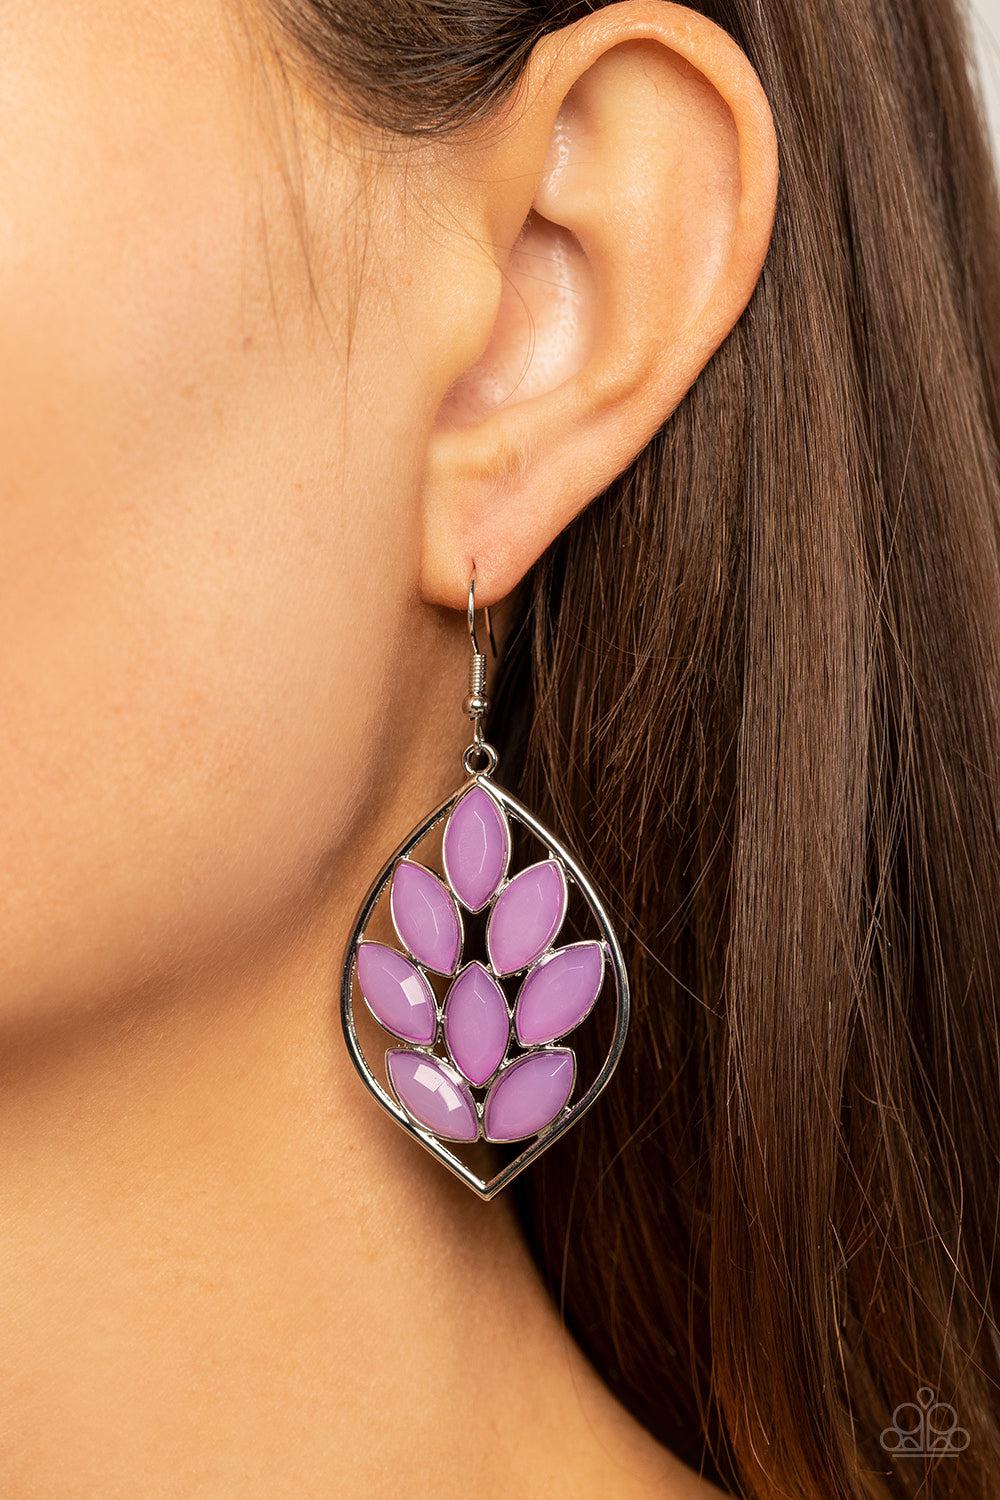 Glacial Glades Purple Earrings - Paparazzi Accessories- lightbox - CarasShop.com - $5 Jewelry by Cara Jewels